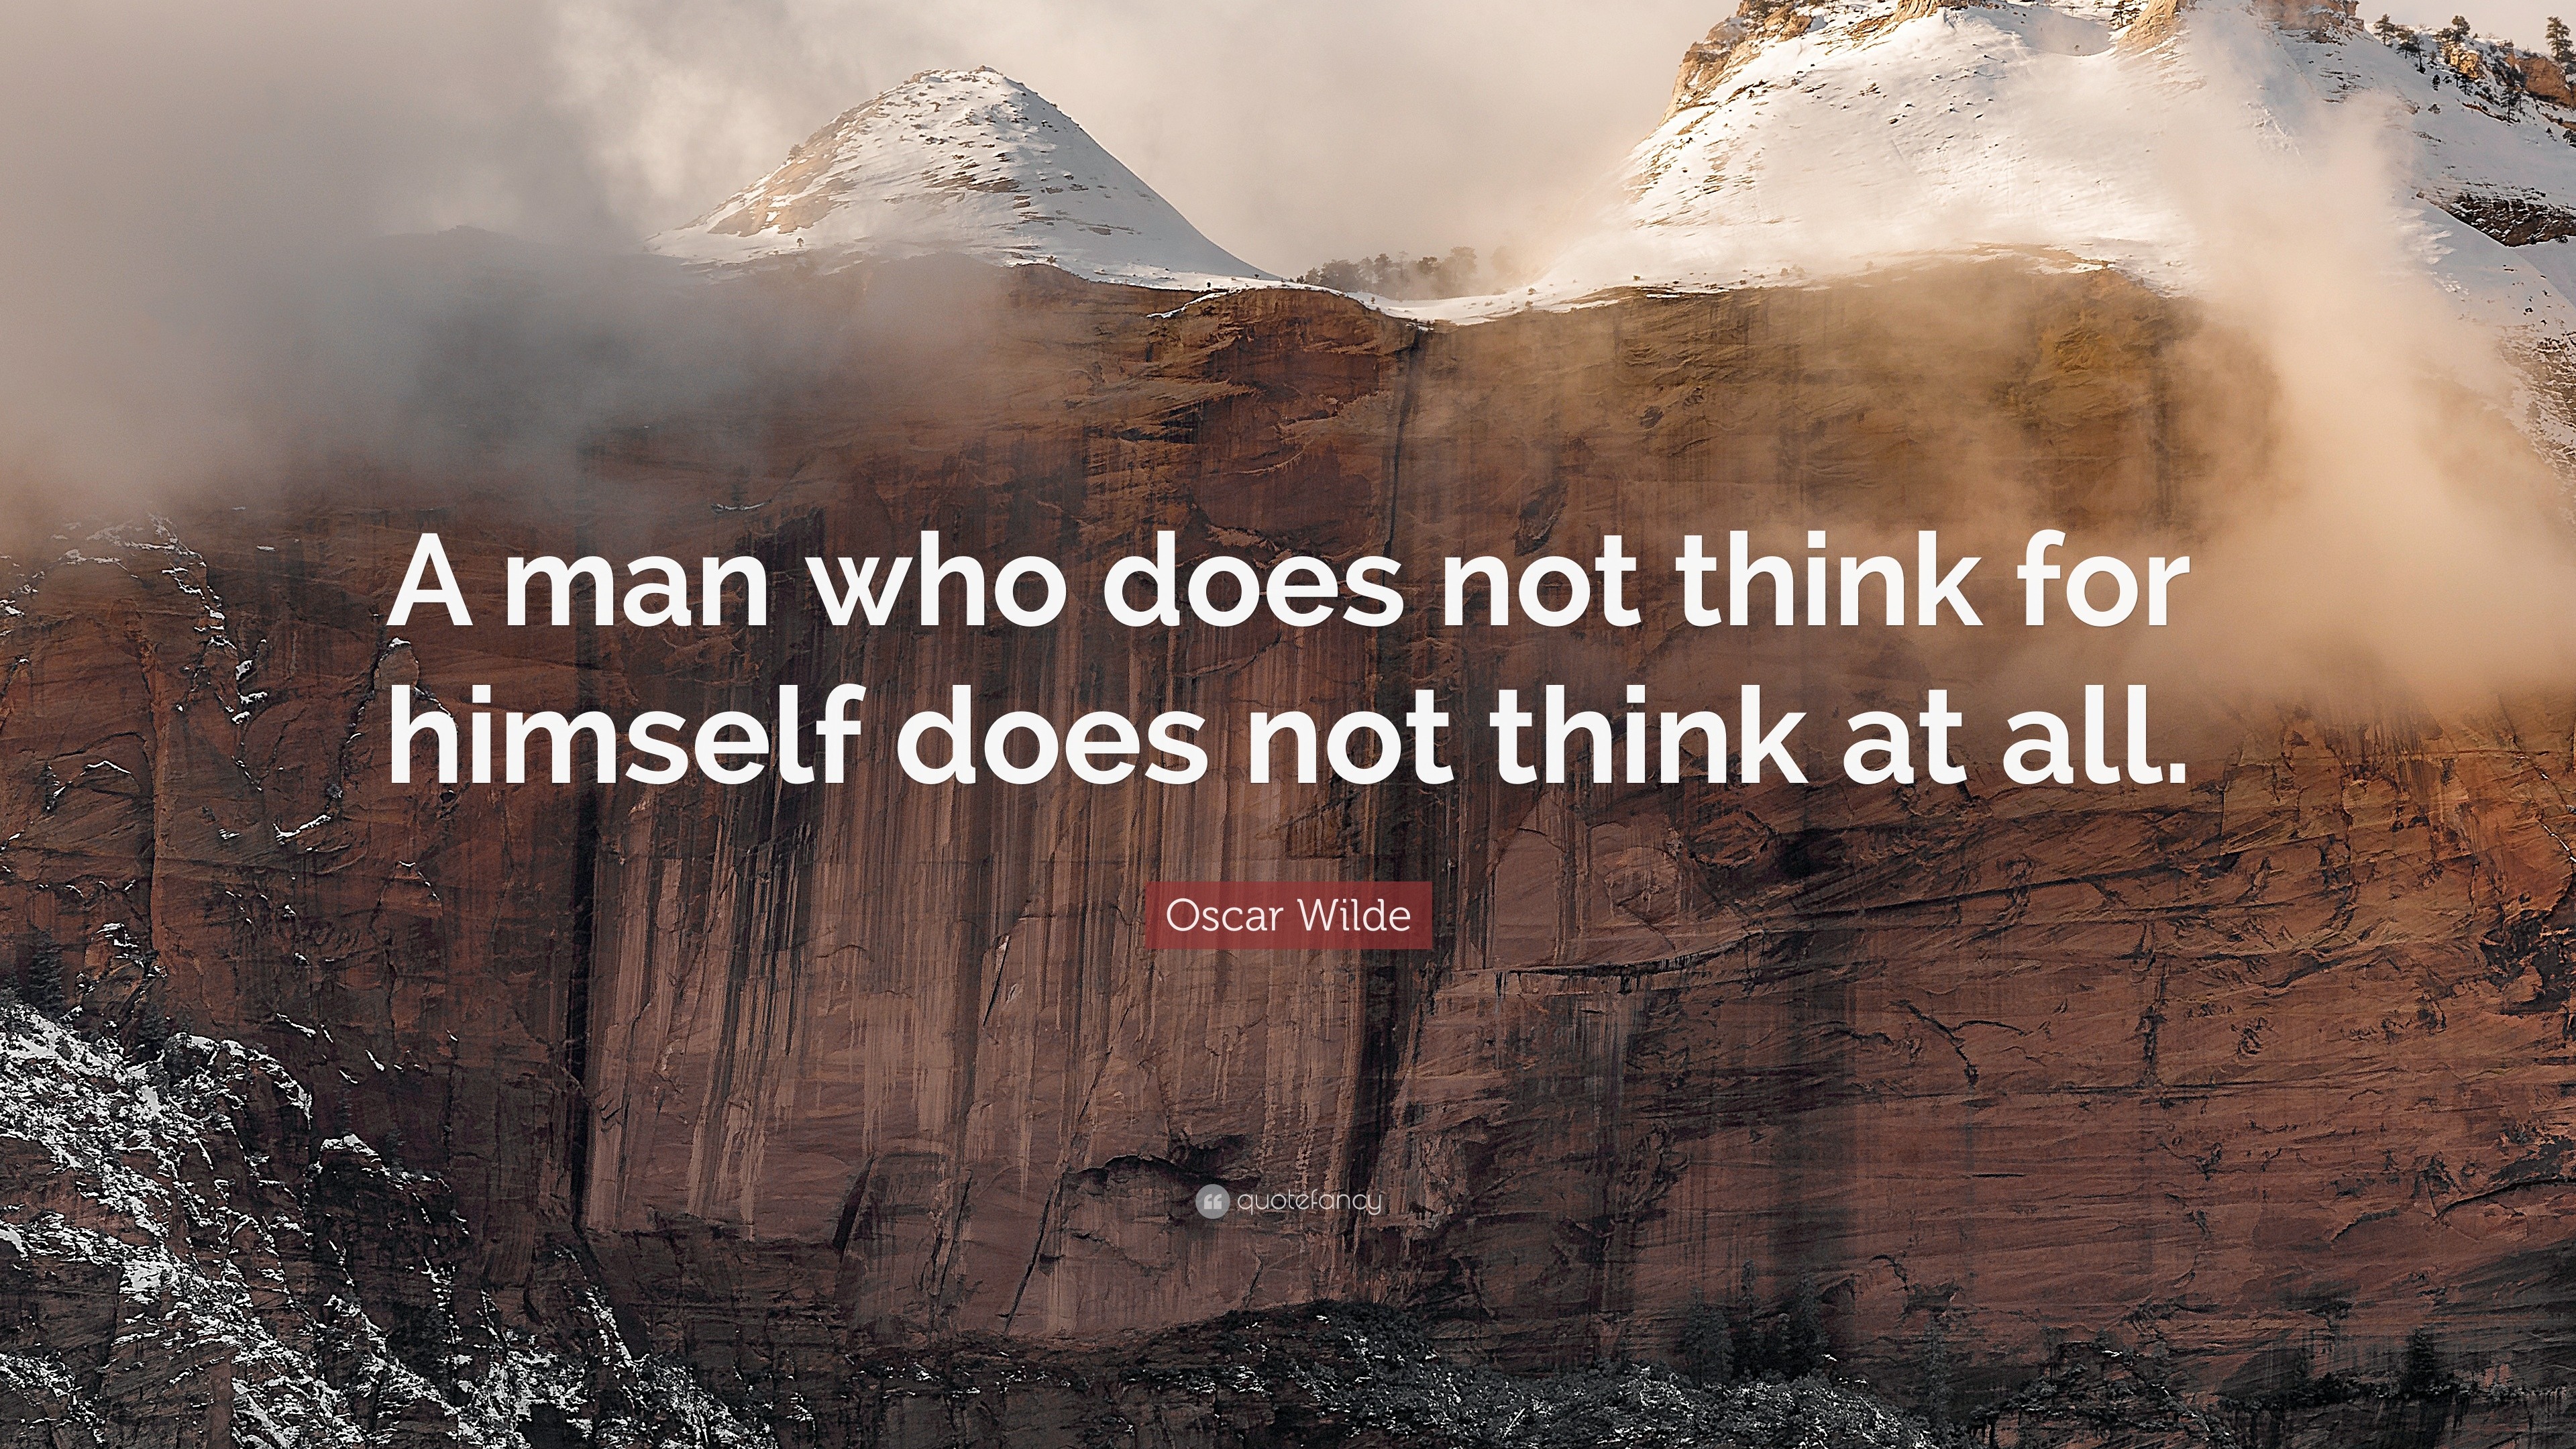 Rauw Ministerie Leer Oscar Wilde Quote: “A man who does not think for himself does not think at  all.”